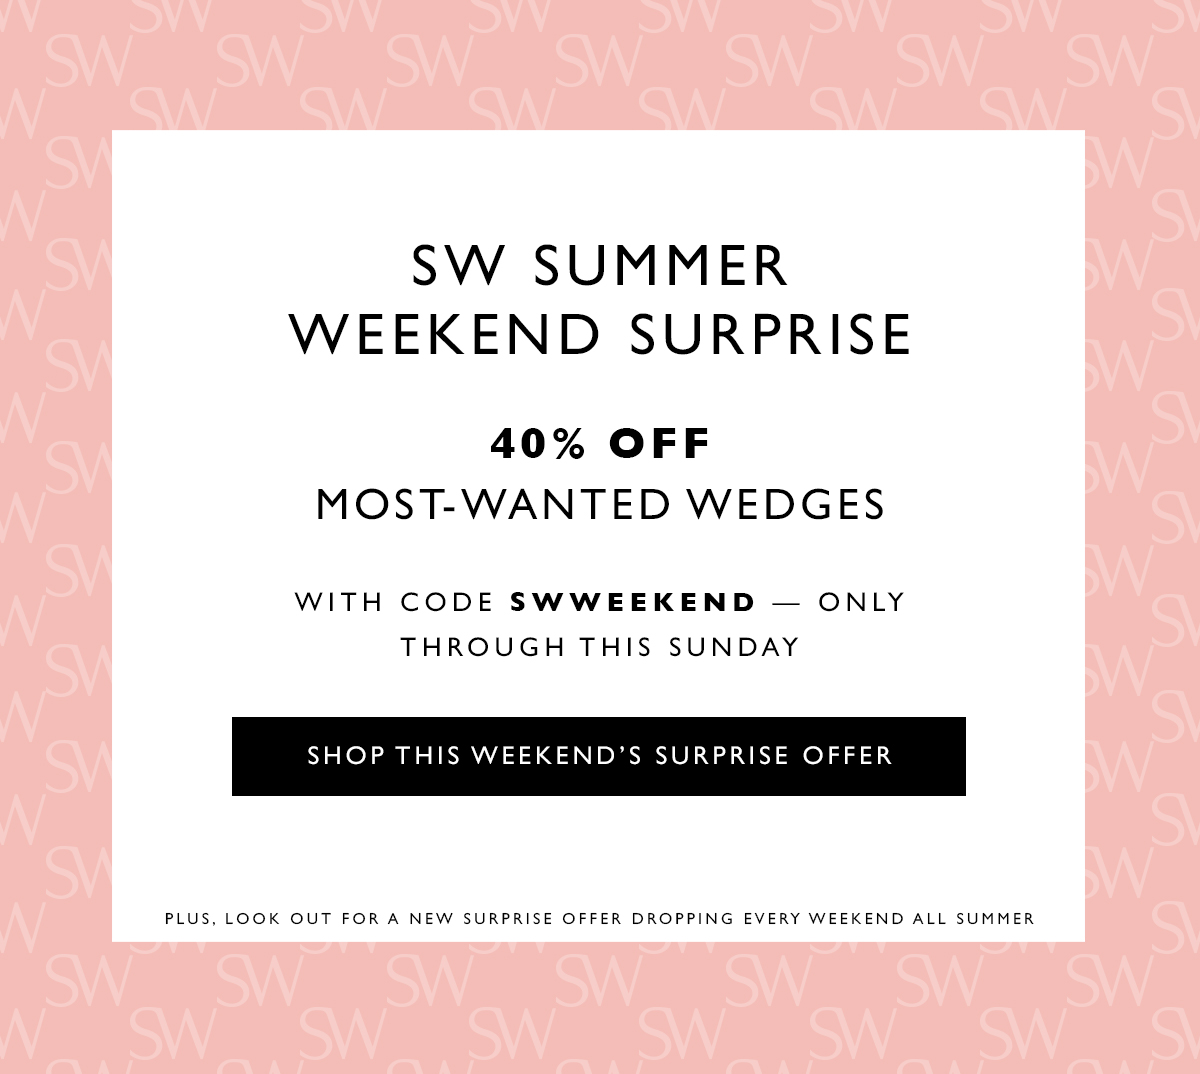 SW Summer Weekend Surprise. Last-chance style essentials starting at $140 — this weekend only. SHOP THIS WEEKEND’S SURPRISE OFFER